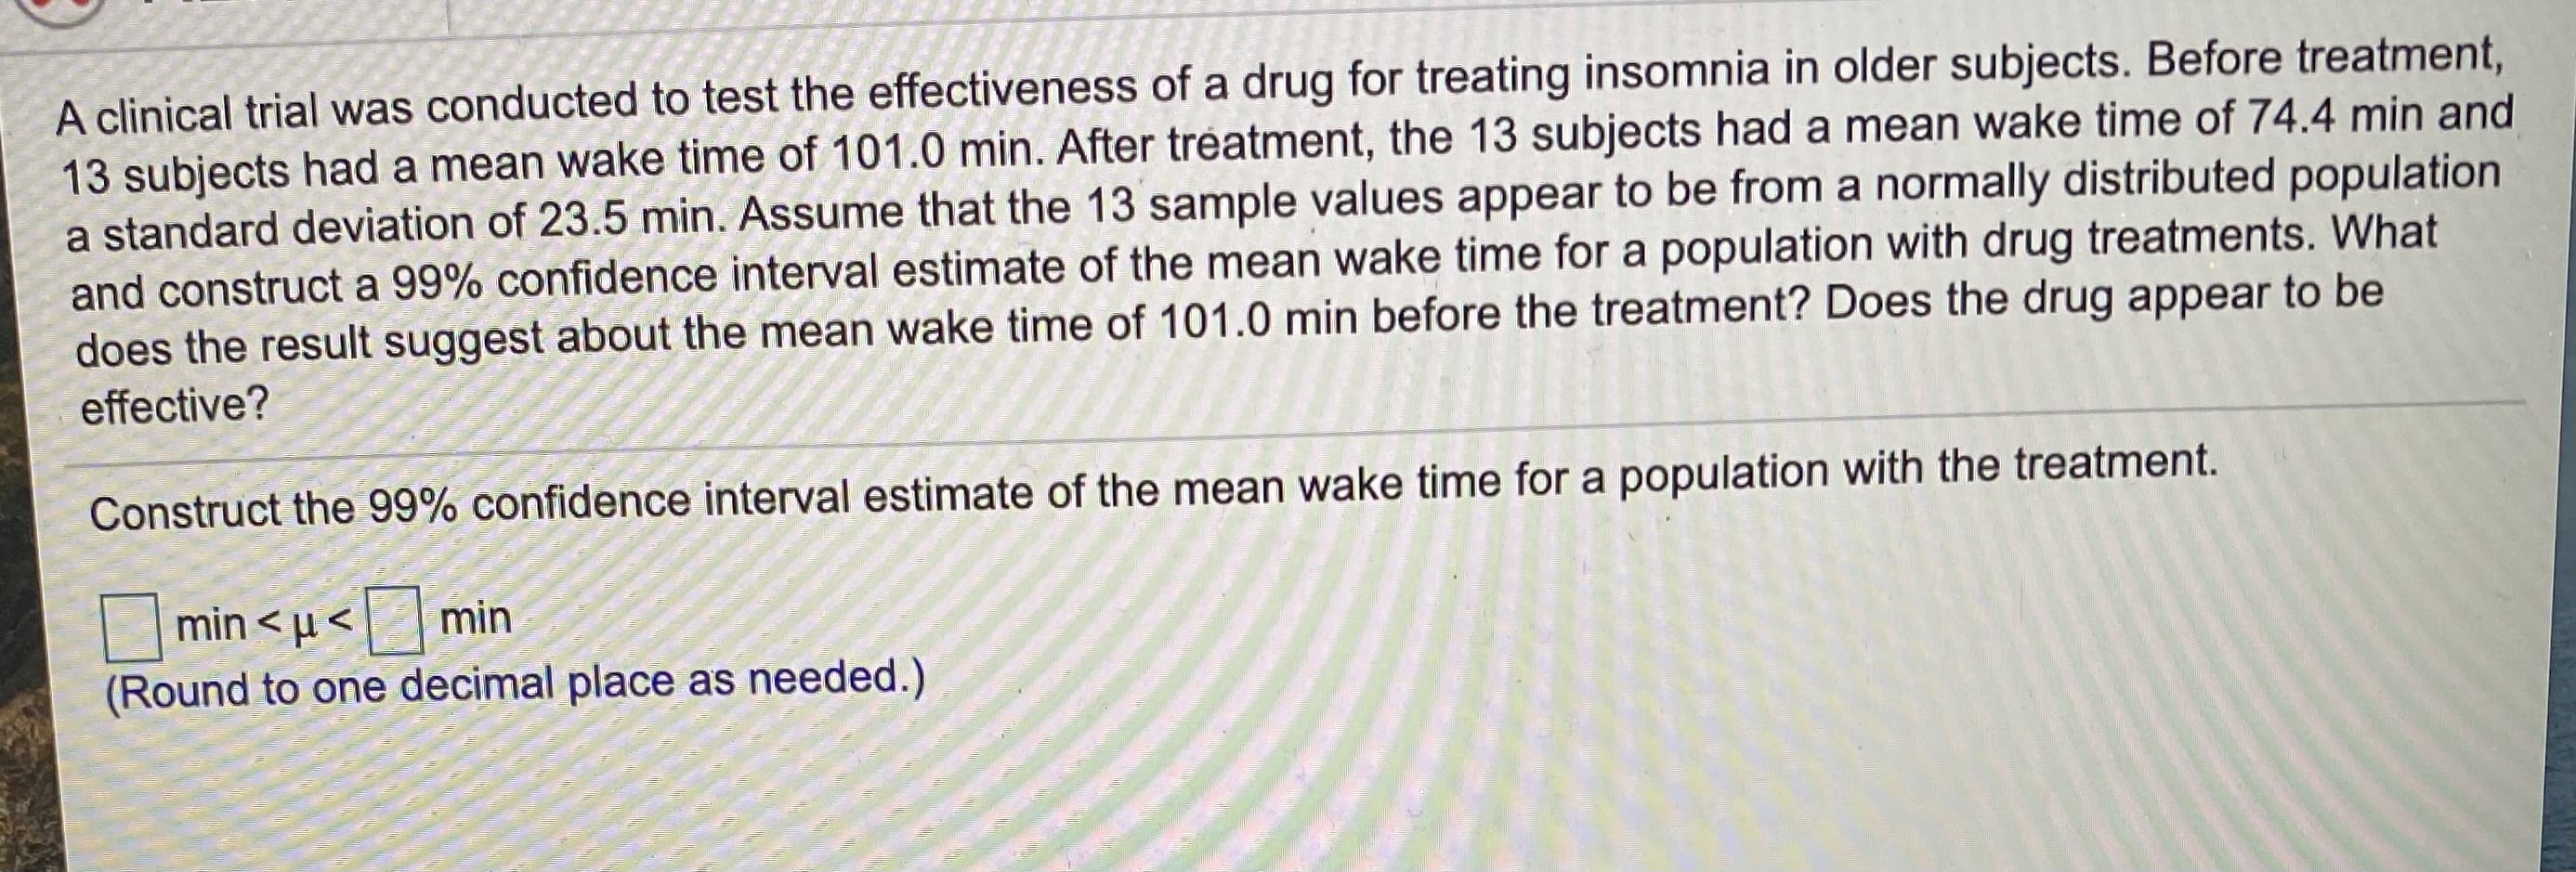 A clinical trial was conducted to test the effectiveness of a drug for treating insomnia in older subjects. Before treatment,
13 subjects had a mean wake time of 101.0 min. After tréatment, the 13 subjects had a mean wake time of 74.4 min and
a standard deviation of 23.5 min. Assume that the 13 sample values appear to be from a normally distributed population
and construct a 99% confidence interval estimate of the mean wake time for a population with drug treatments. What
does the result suggest about the mean wake time of 101.0 min before the treatment? Does the drug appear to be
effective?
Construct the 99% confidence interval estimate of the mean wake time for a population with the treatment.
min < µ < min
(Round to one decimal place as needed.)
|
